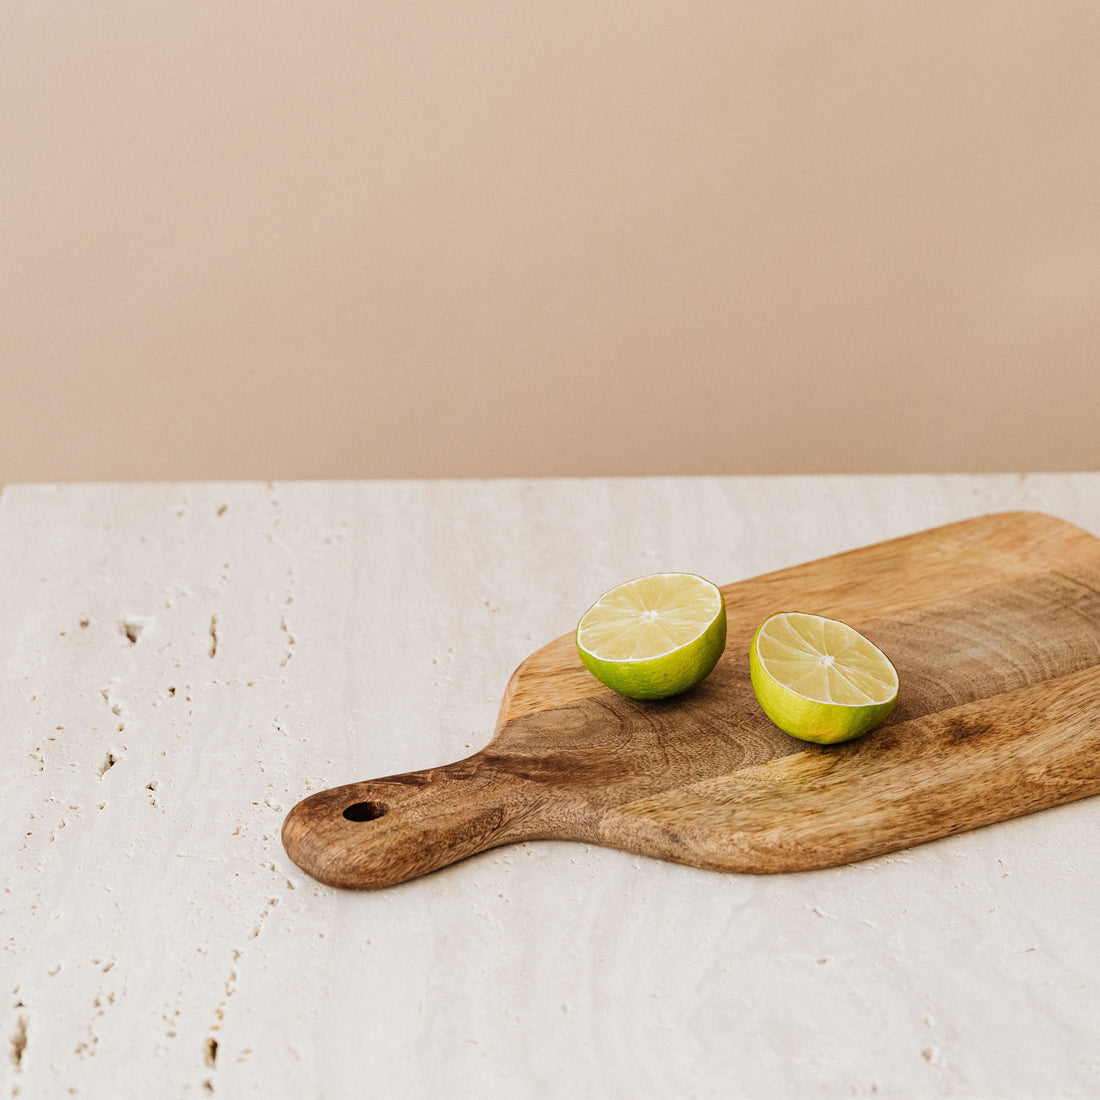 What Type of Oils are Safe to Use on Your Cutting Board